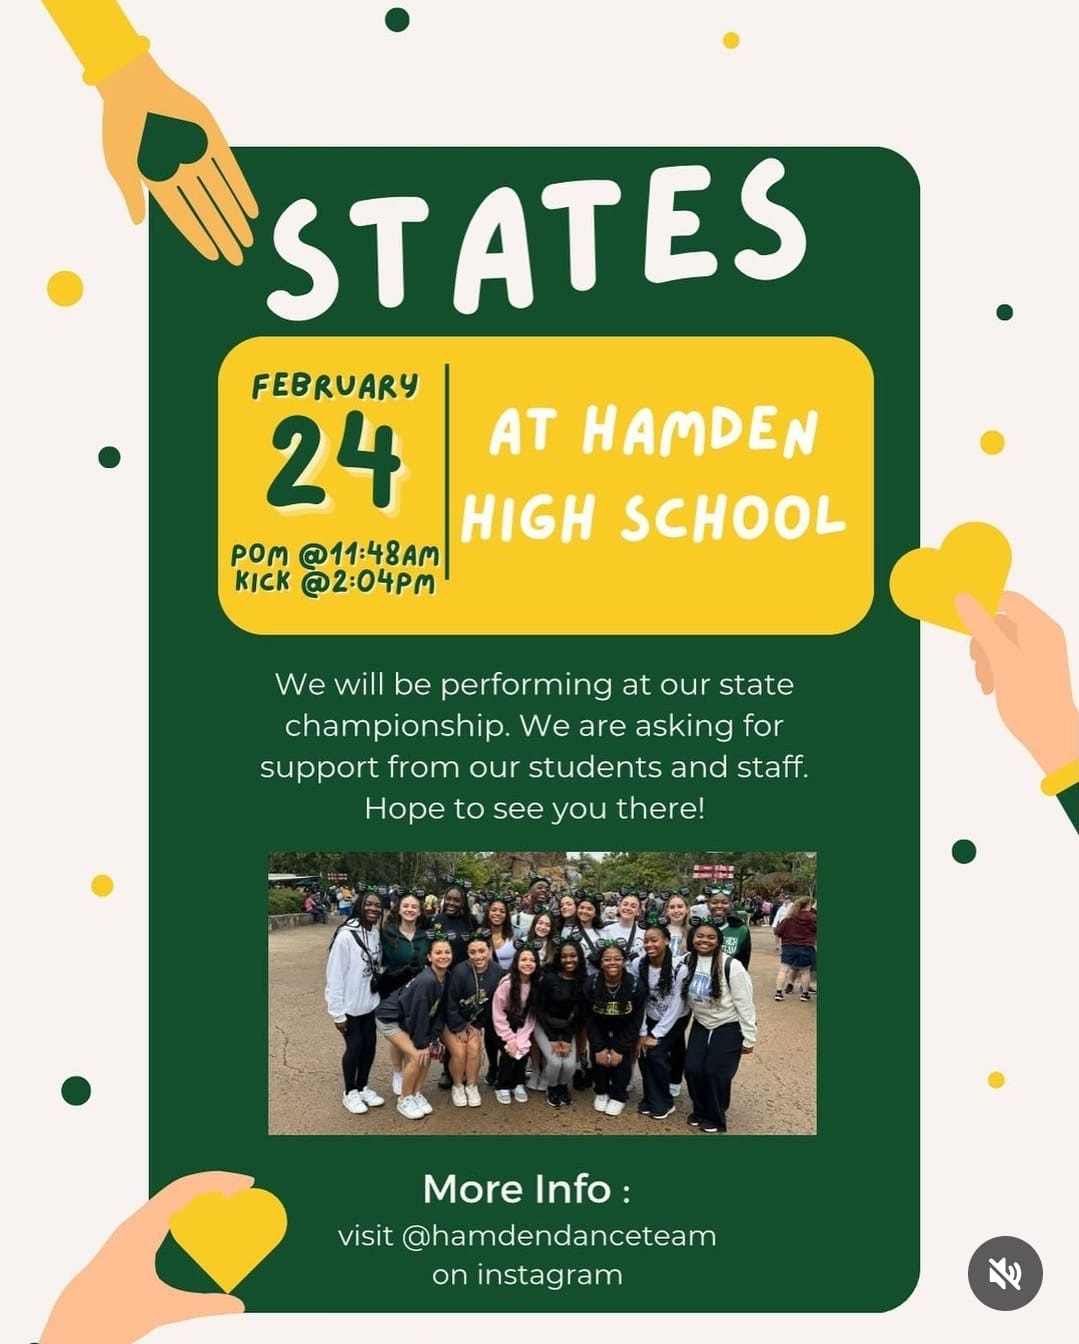 May be an image of text that says 'STATES FEBRUARY 24 AT HAMDEN pOM @11:48AM HIGH SCHOOL KIcK @2:04PM We will be performing at our state championship. We are asking for support from our students and staff. Hope to see you there! More Info: visit @hamdendanceteam on instagram'